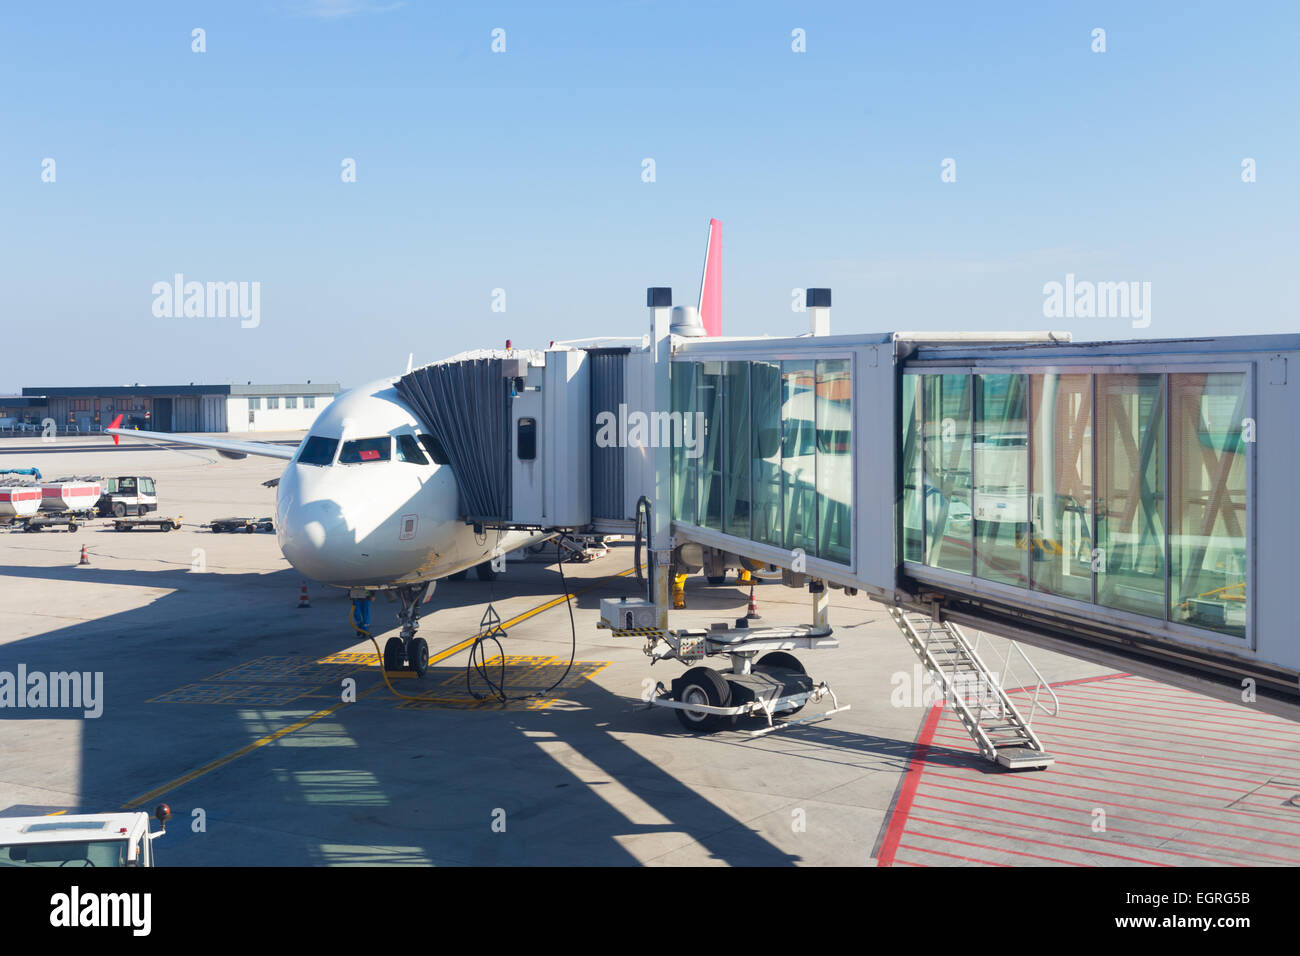 Jetway conecting plane to airport departure gates. Stock Photo